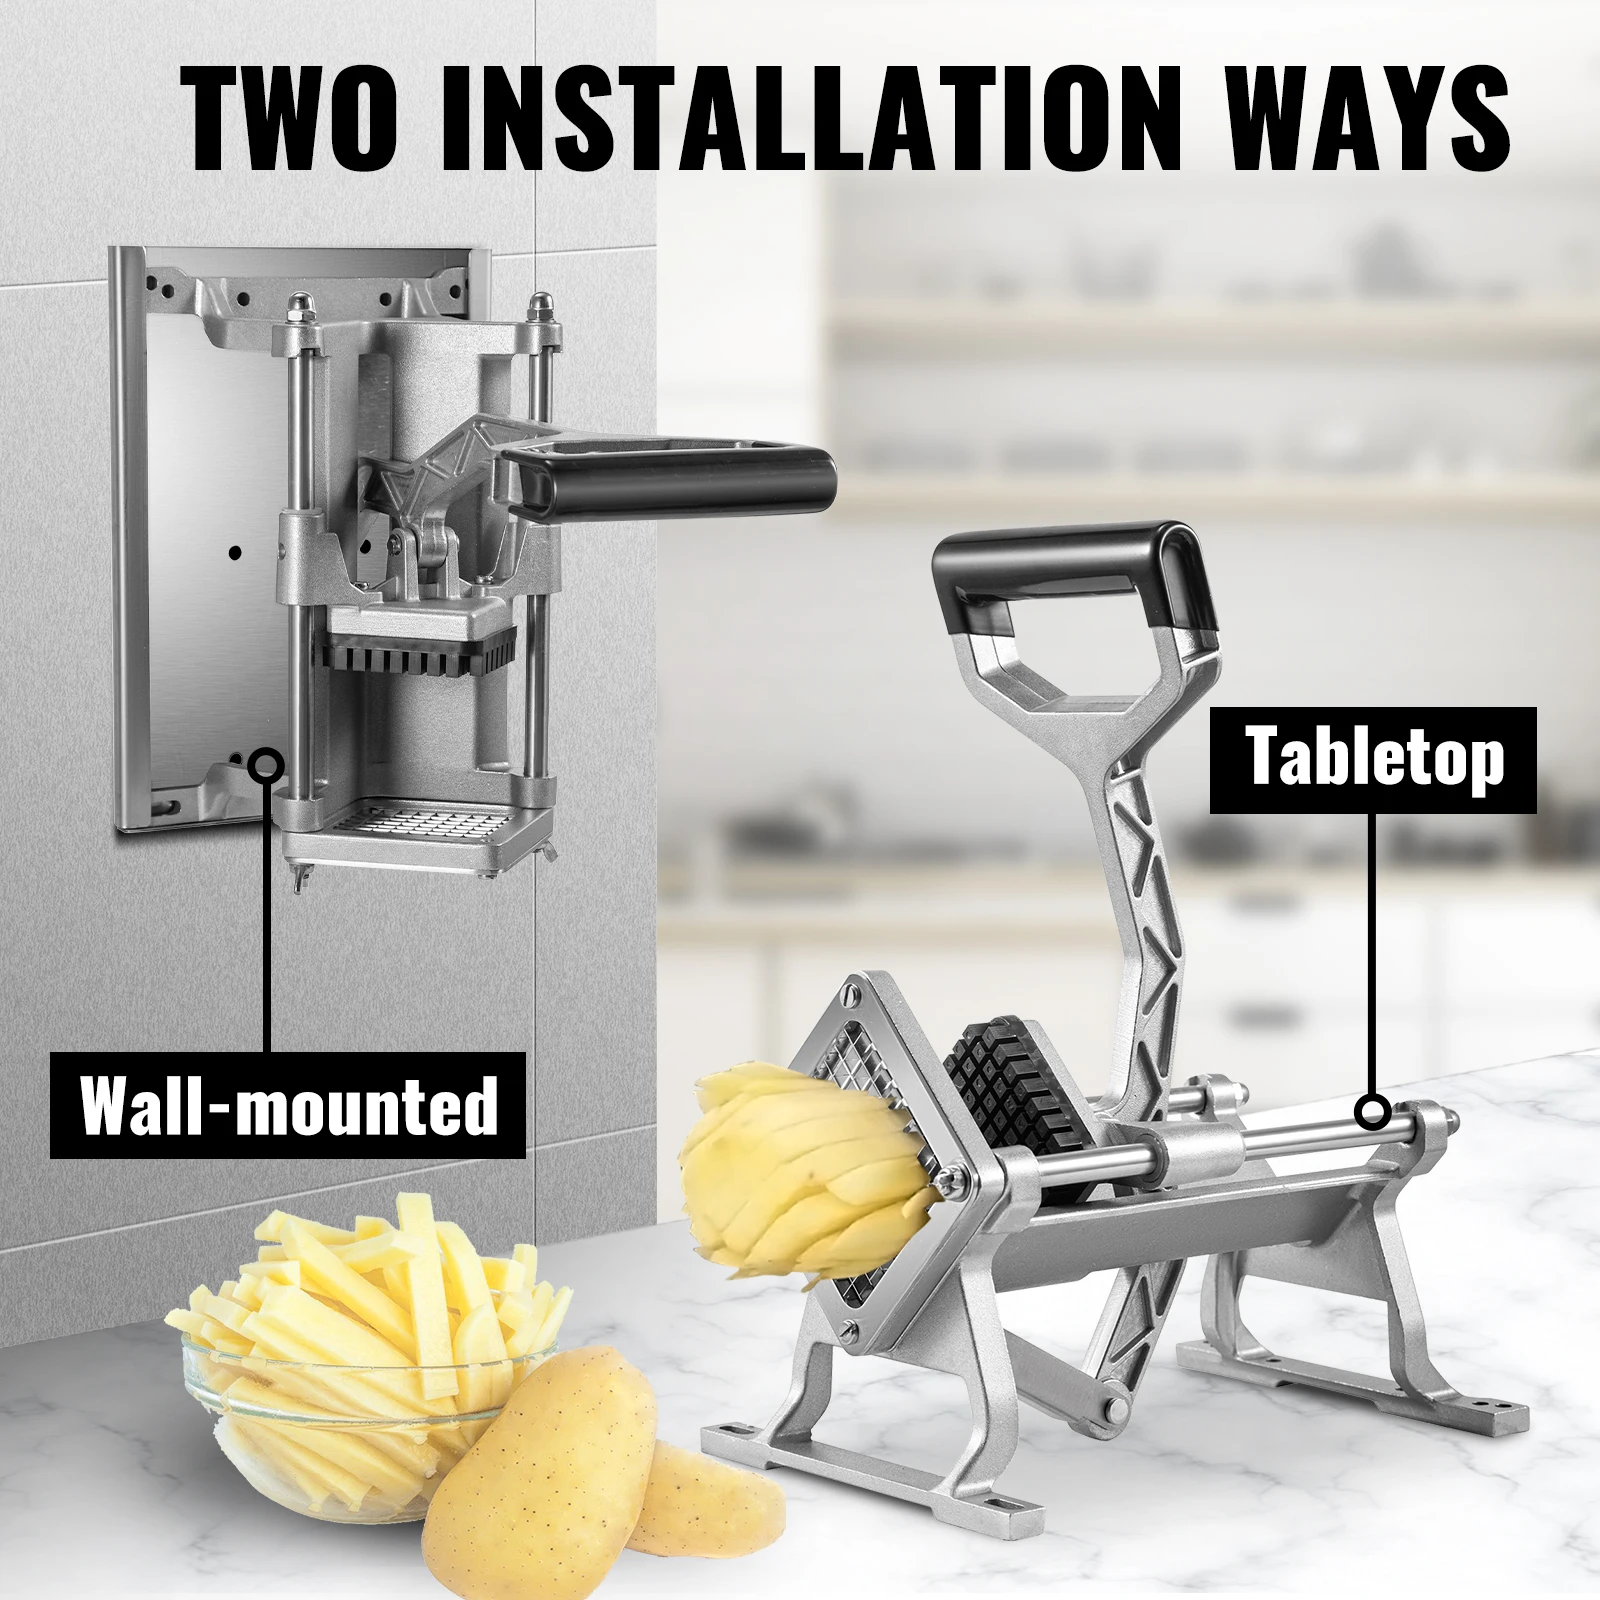 https://ae01.alicdn.com/kf/S4e2c15231a3a490e81baf85b59decc73T/French-Fry-Cutter-Stainless-Steel-Heavy-Duty-Potato-Cutter-Kartoffel-Slicer-With-Bracket-Tabletop-Home-Vegetable.jpg